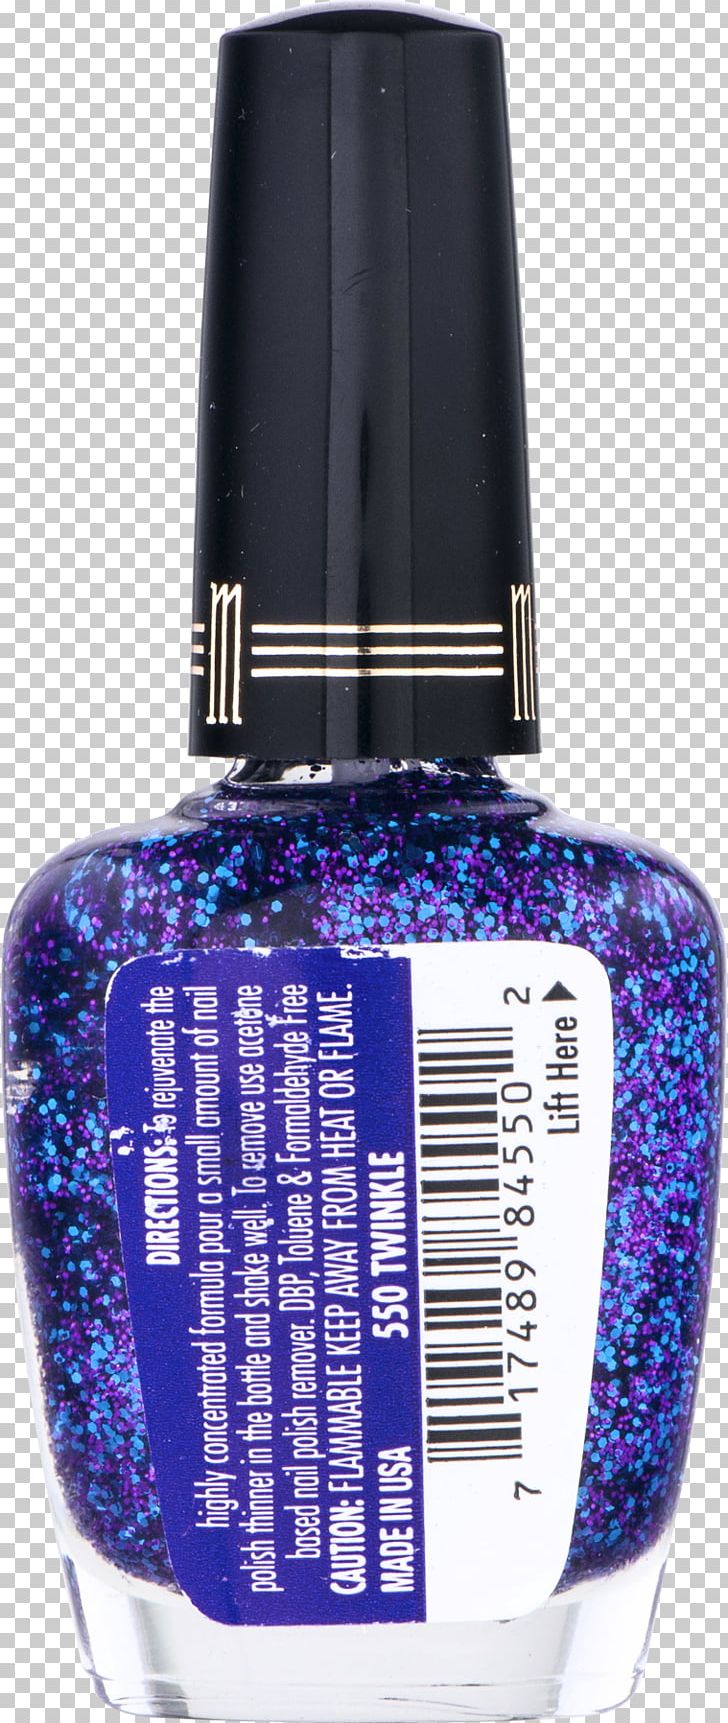 Nail Polish Glitter Milani Nail Lacquer Fluid Ounce PNG, Clipart, Bottle, Cosmetics, Electric Blue, Fluid Ounce, Glitter Free PNG Download